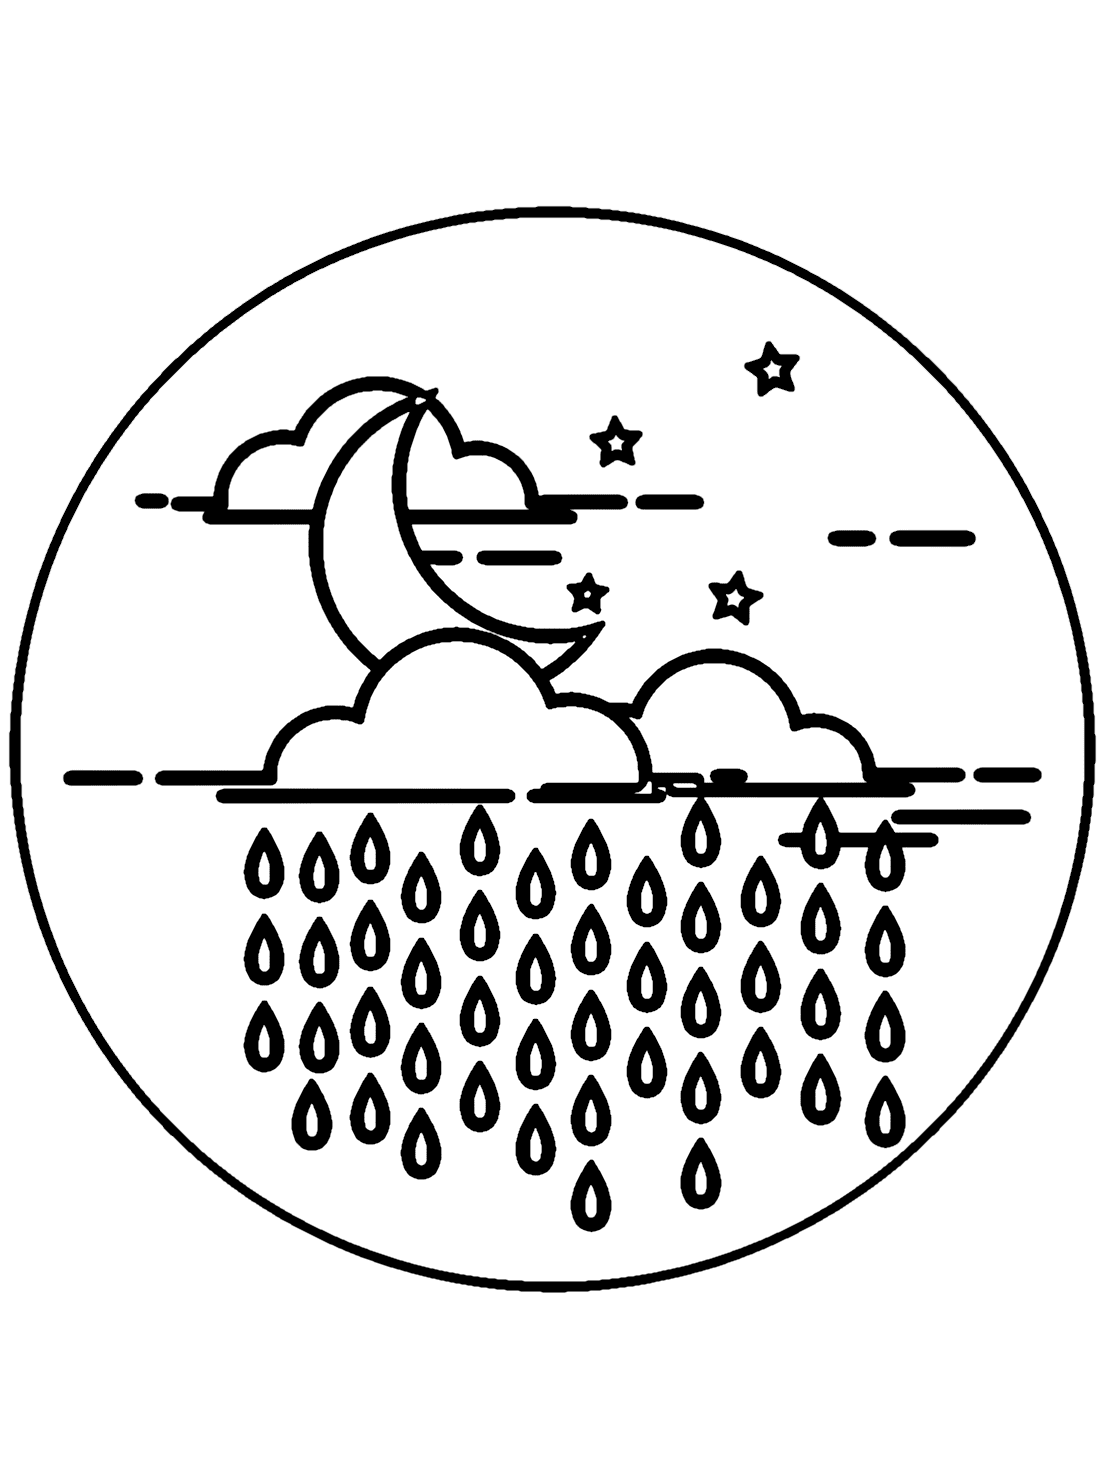 Stars in the sky coloring pages